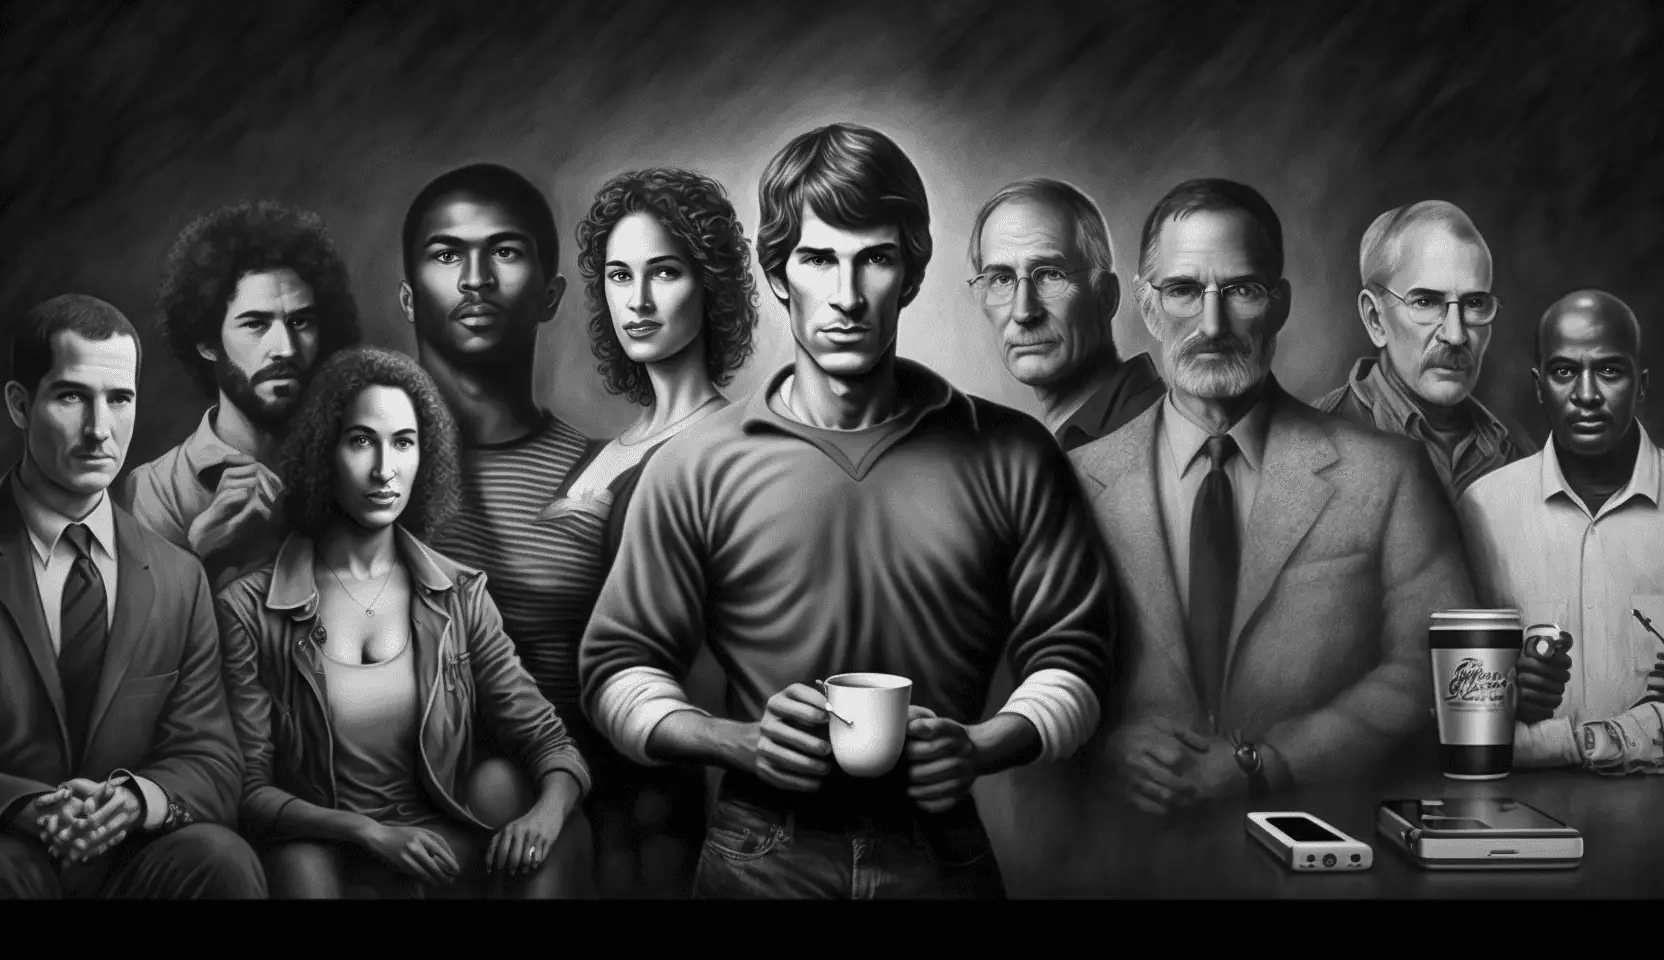 brewbart_Iconic_photorealistic_picture_of_a_young_Steve_Jobs_as_fe7e7db1-ea1e-4db5-83c3-c234da5ba04d